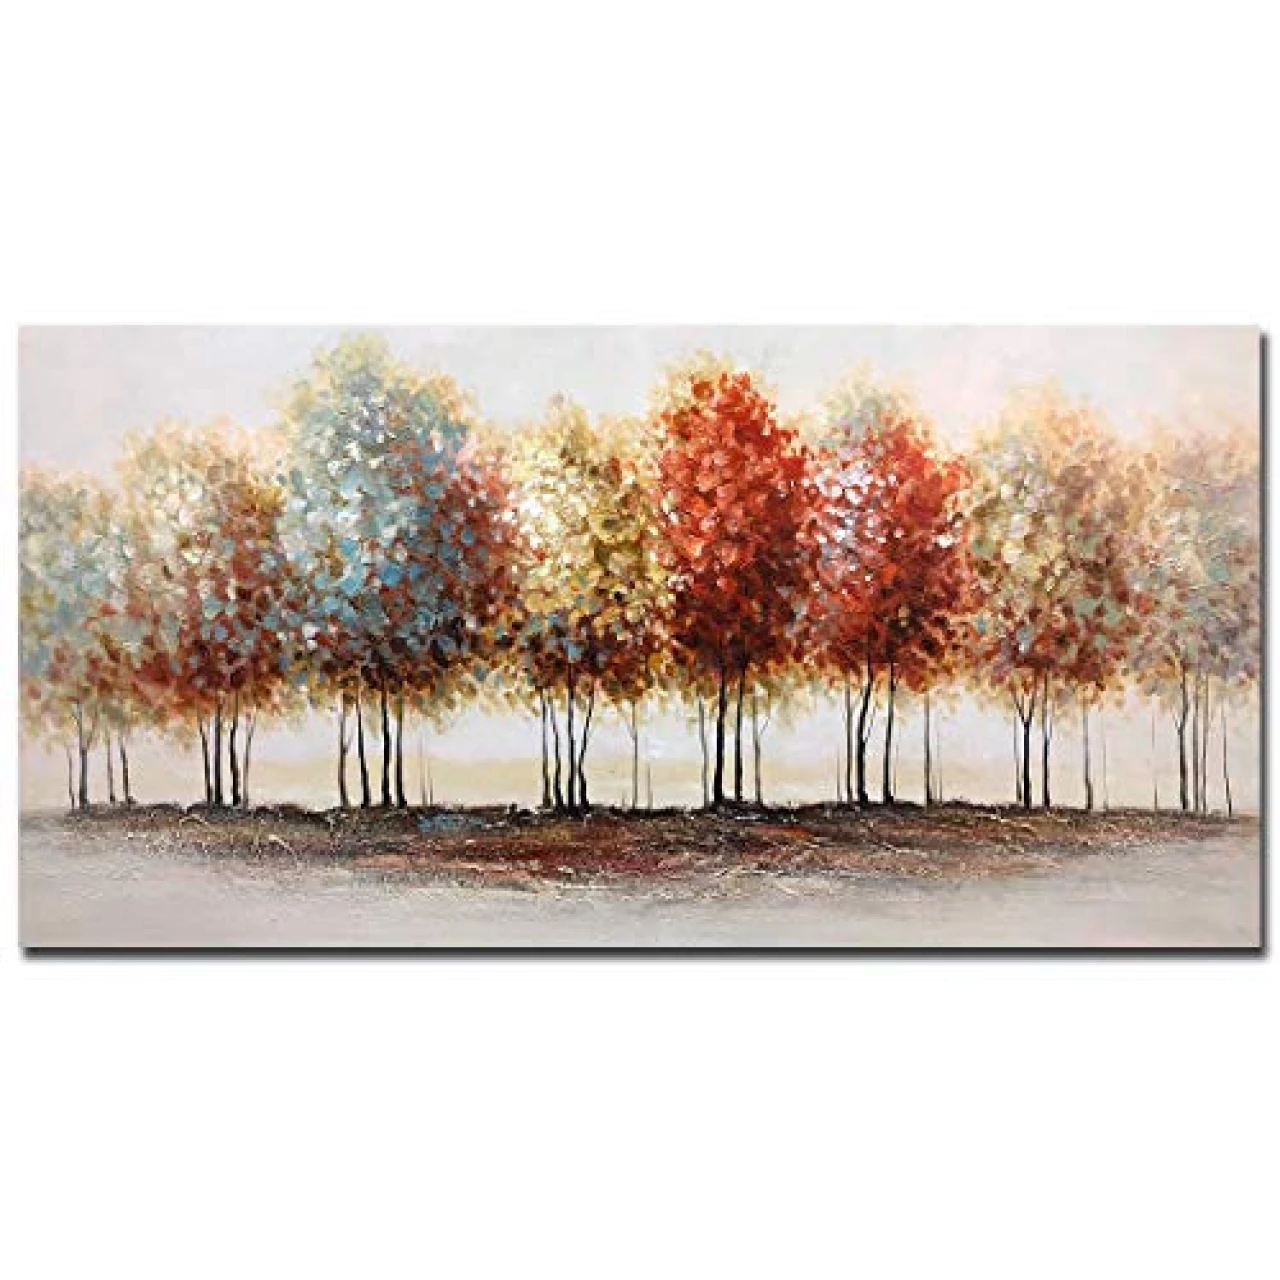 Tiancheng Art, 30x60 Inch Modern Abstract Painting Oil Hand Painting Tree Hand-Painted On Canvas Acrylic Big Wall Art Colorful Forest Home Hanging Wall Decoration